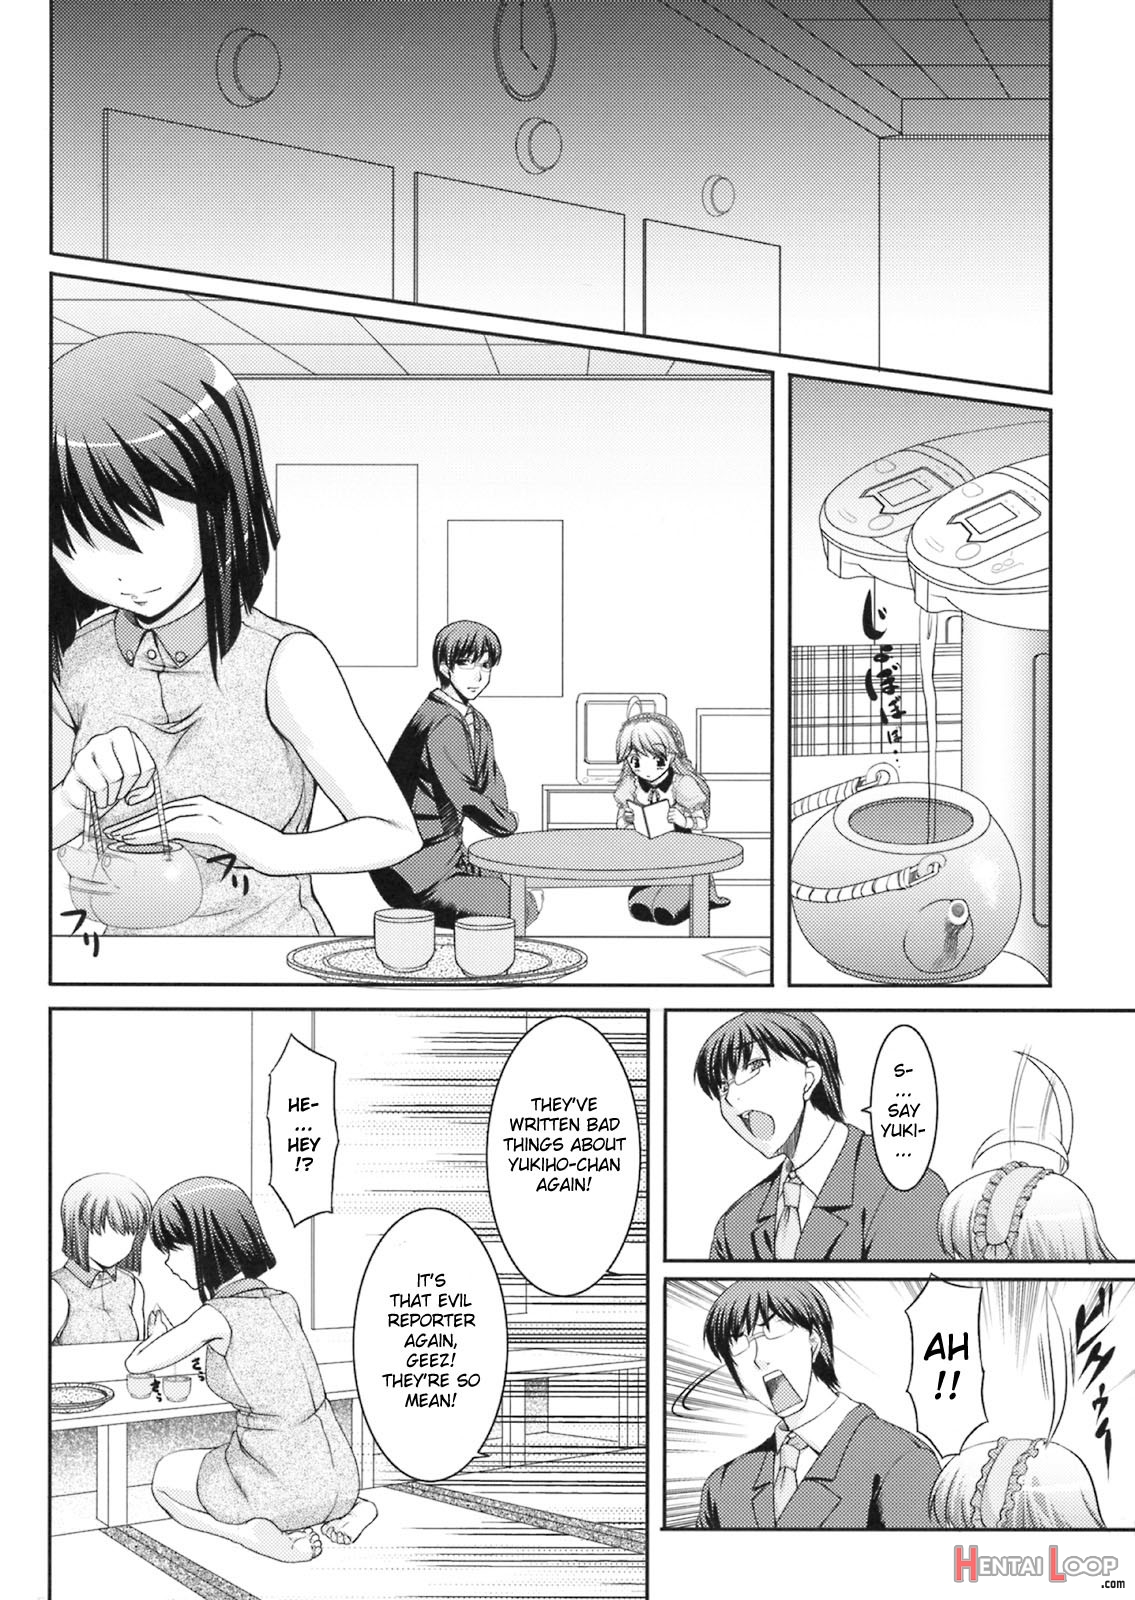 Yukiho's Tea Is The Flavor Of Love page 9